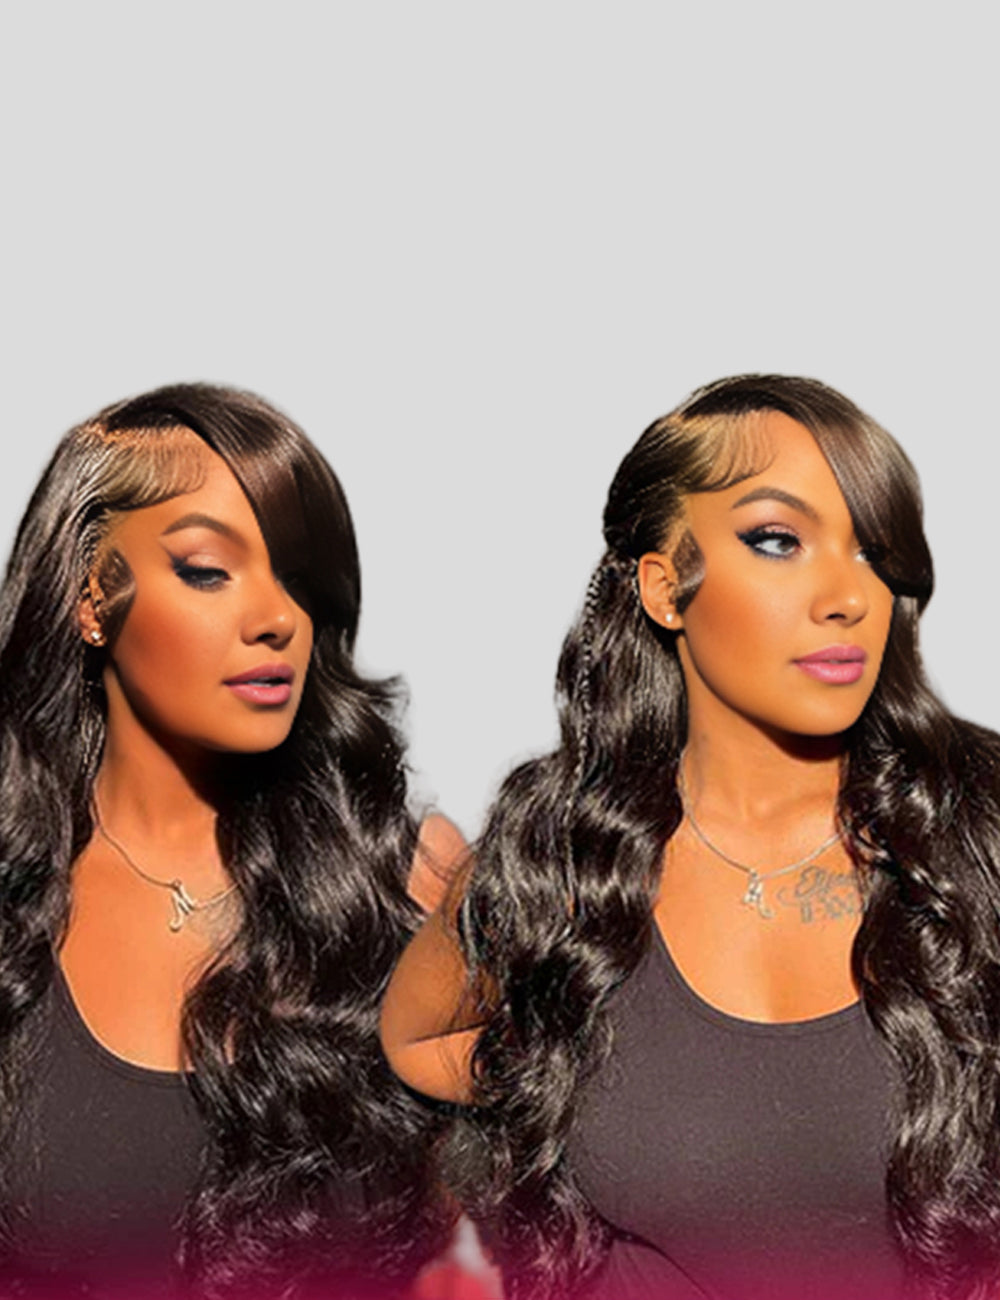 Flash Sale Body Wave Human Hair Wigs 13x4 &amp;13x6 HD Lace Front Wigs